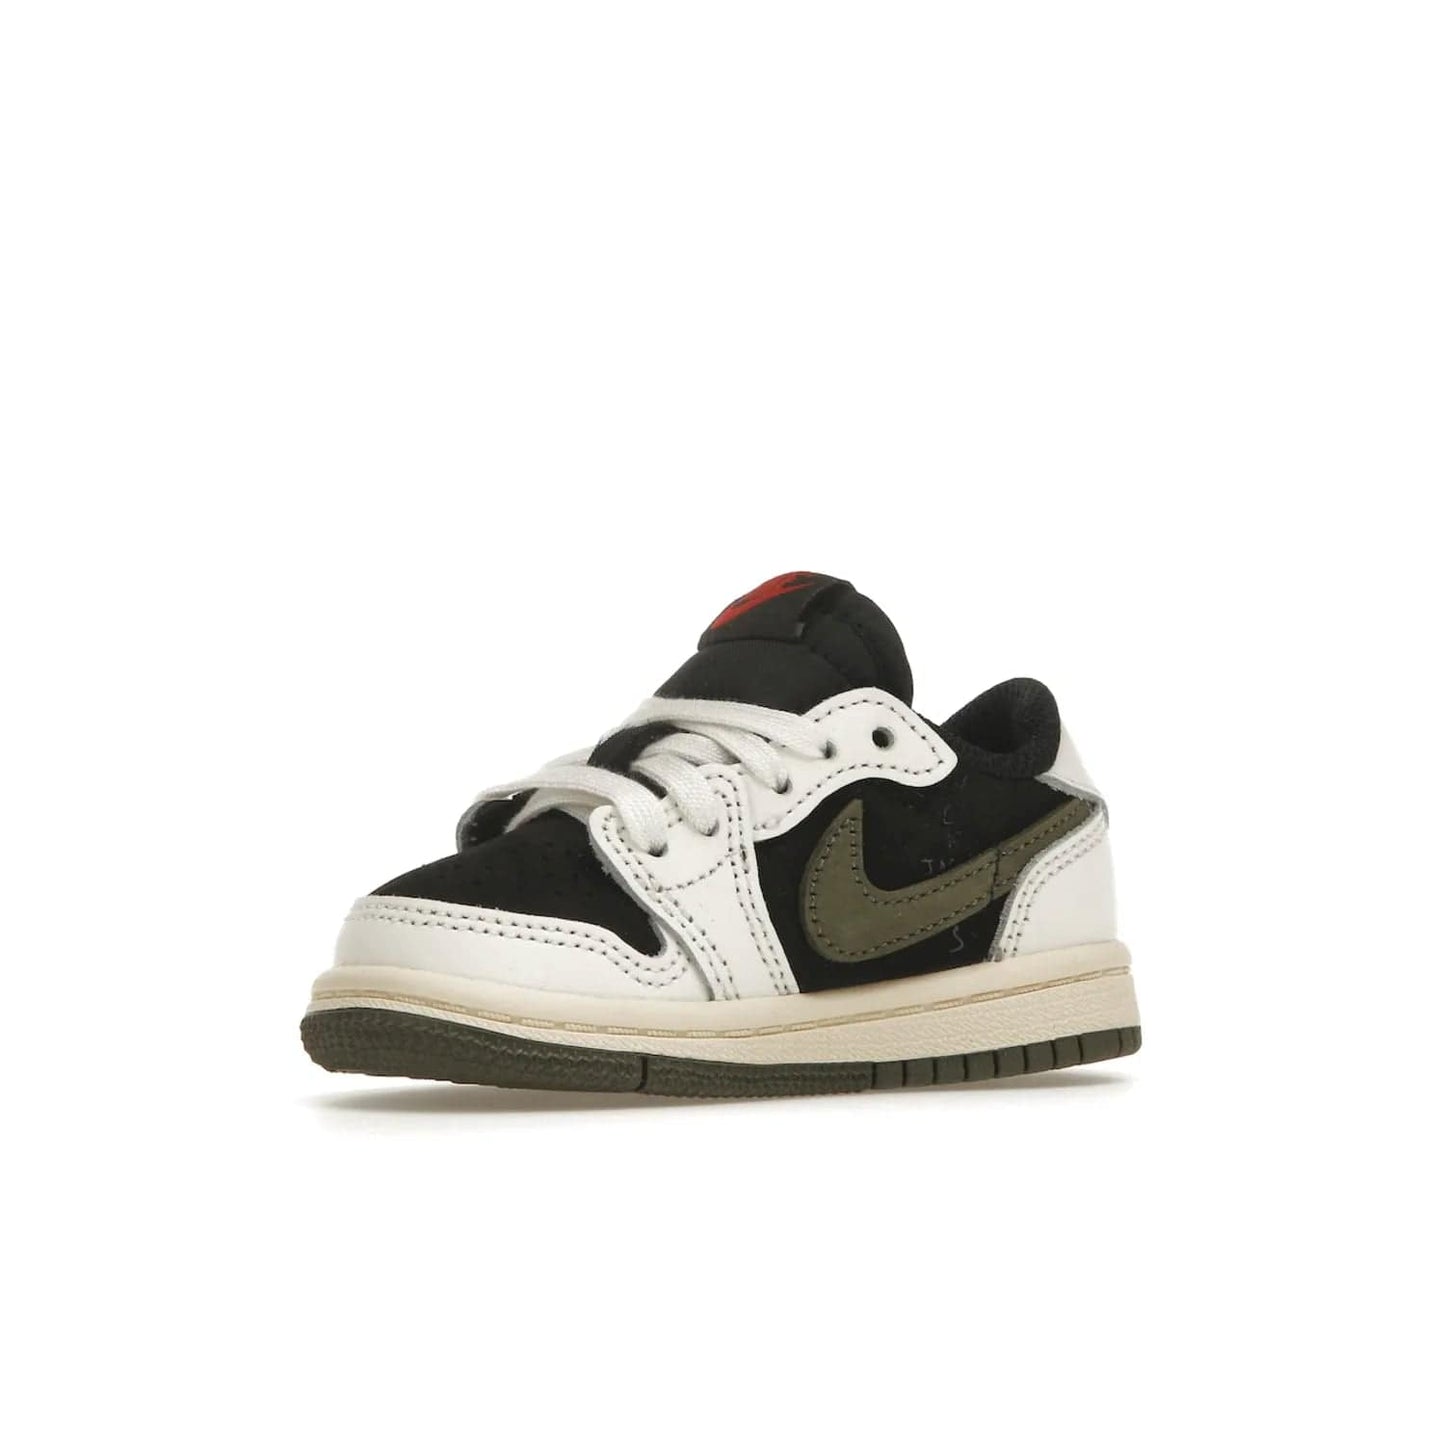 Jordan 1 Retro Low OG SP Travis Scott Olive (TD) - Image 16 - Only at www.BallersClubKickz.com - Get the iconic style & comfort you love with the Jordan 1 Retro Low OG SP Travis Scott Olive. Featuring a premium upper, Sail, Red, Black & Olive colorway & a durable rubber outsole for traction & cushioning. Get it now!